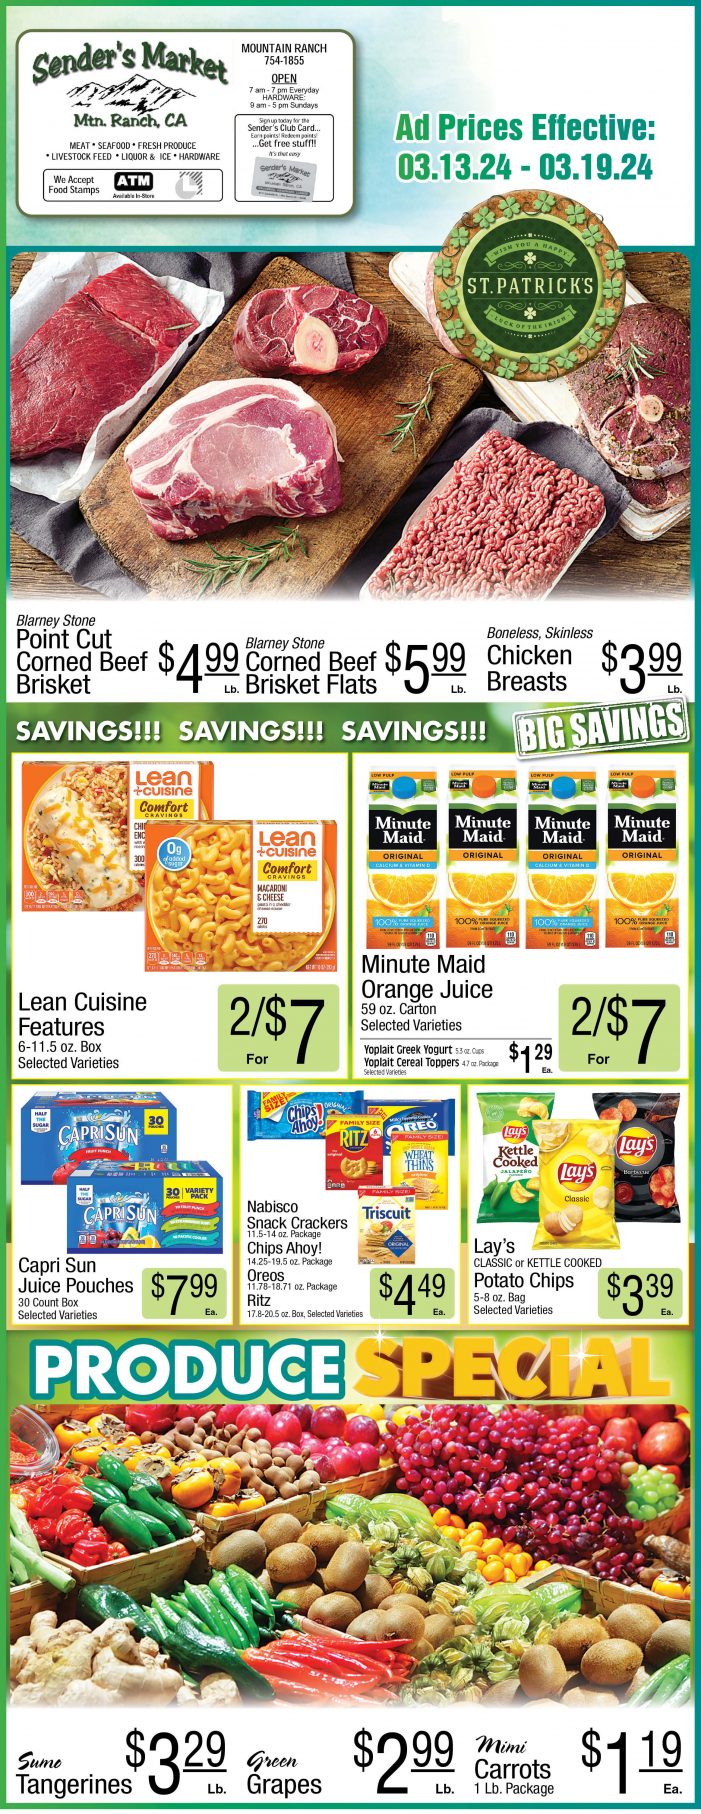 Sender’s Market Weekly Ad & Grocery Specials Through March 19th! Shop Local & Save!!